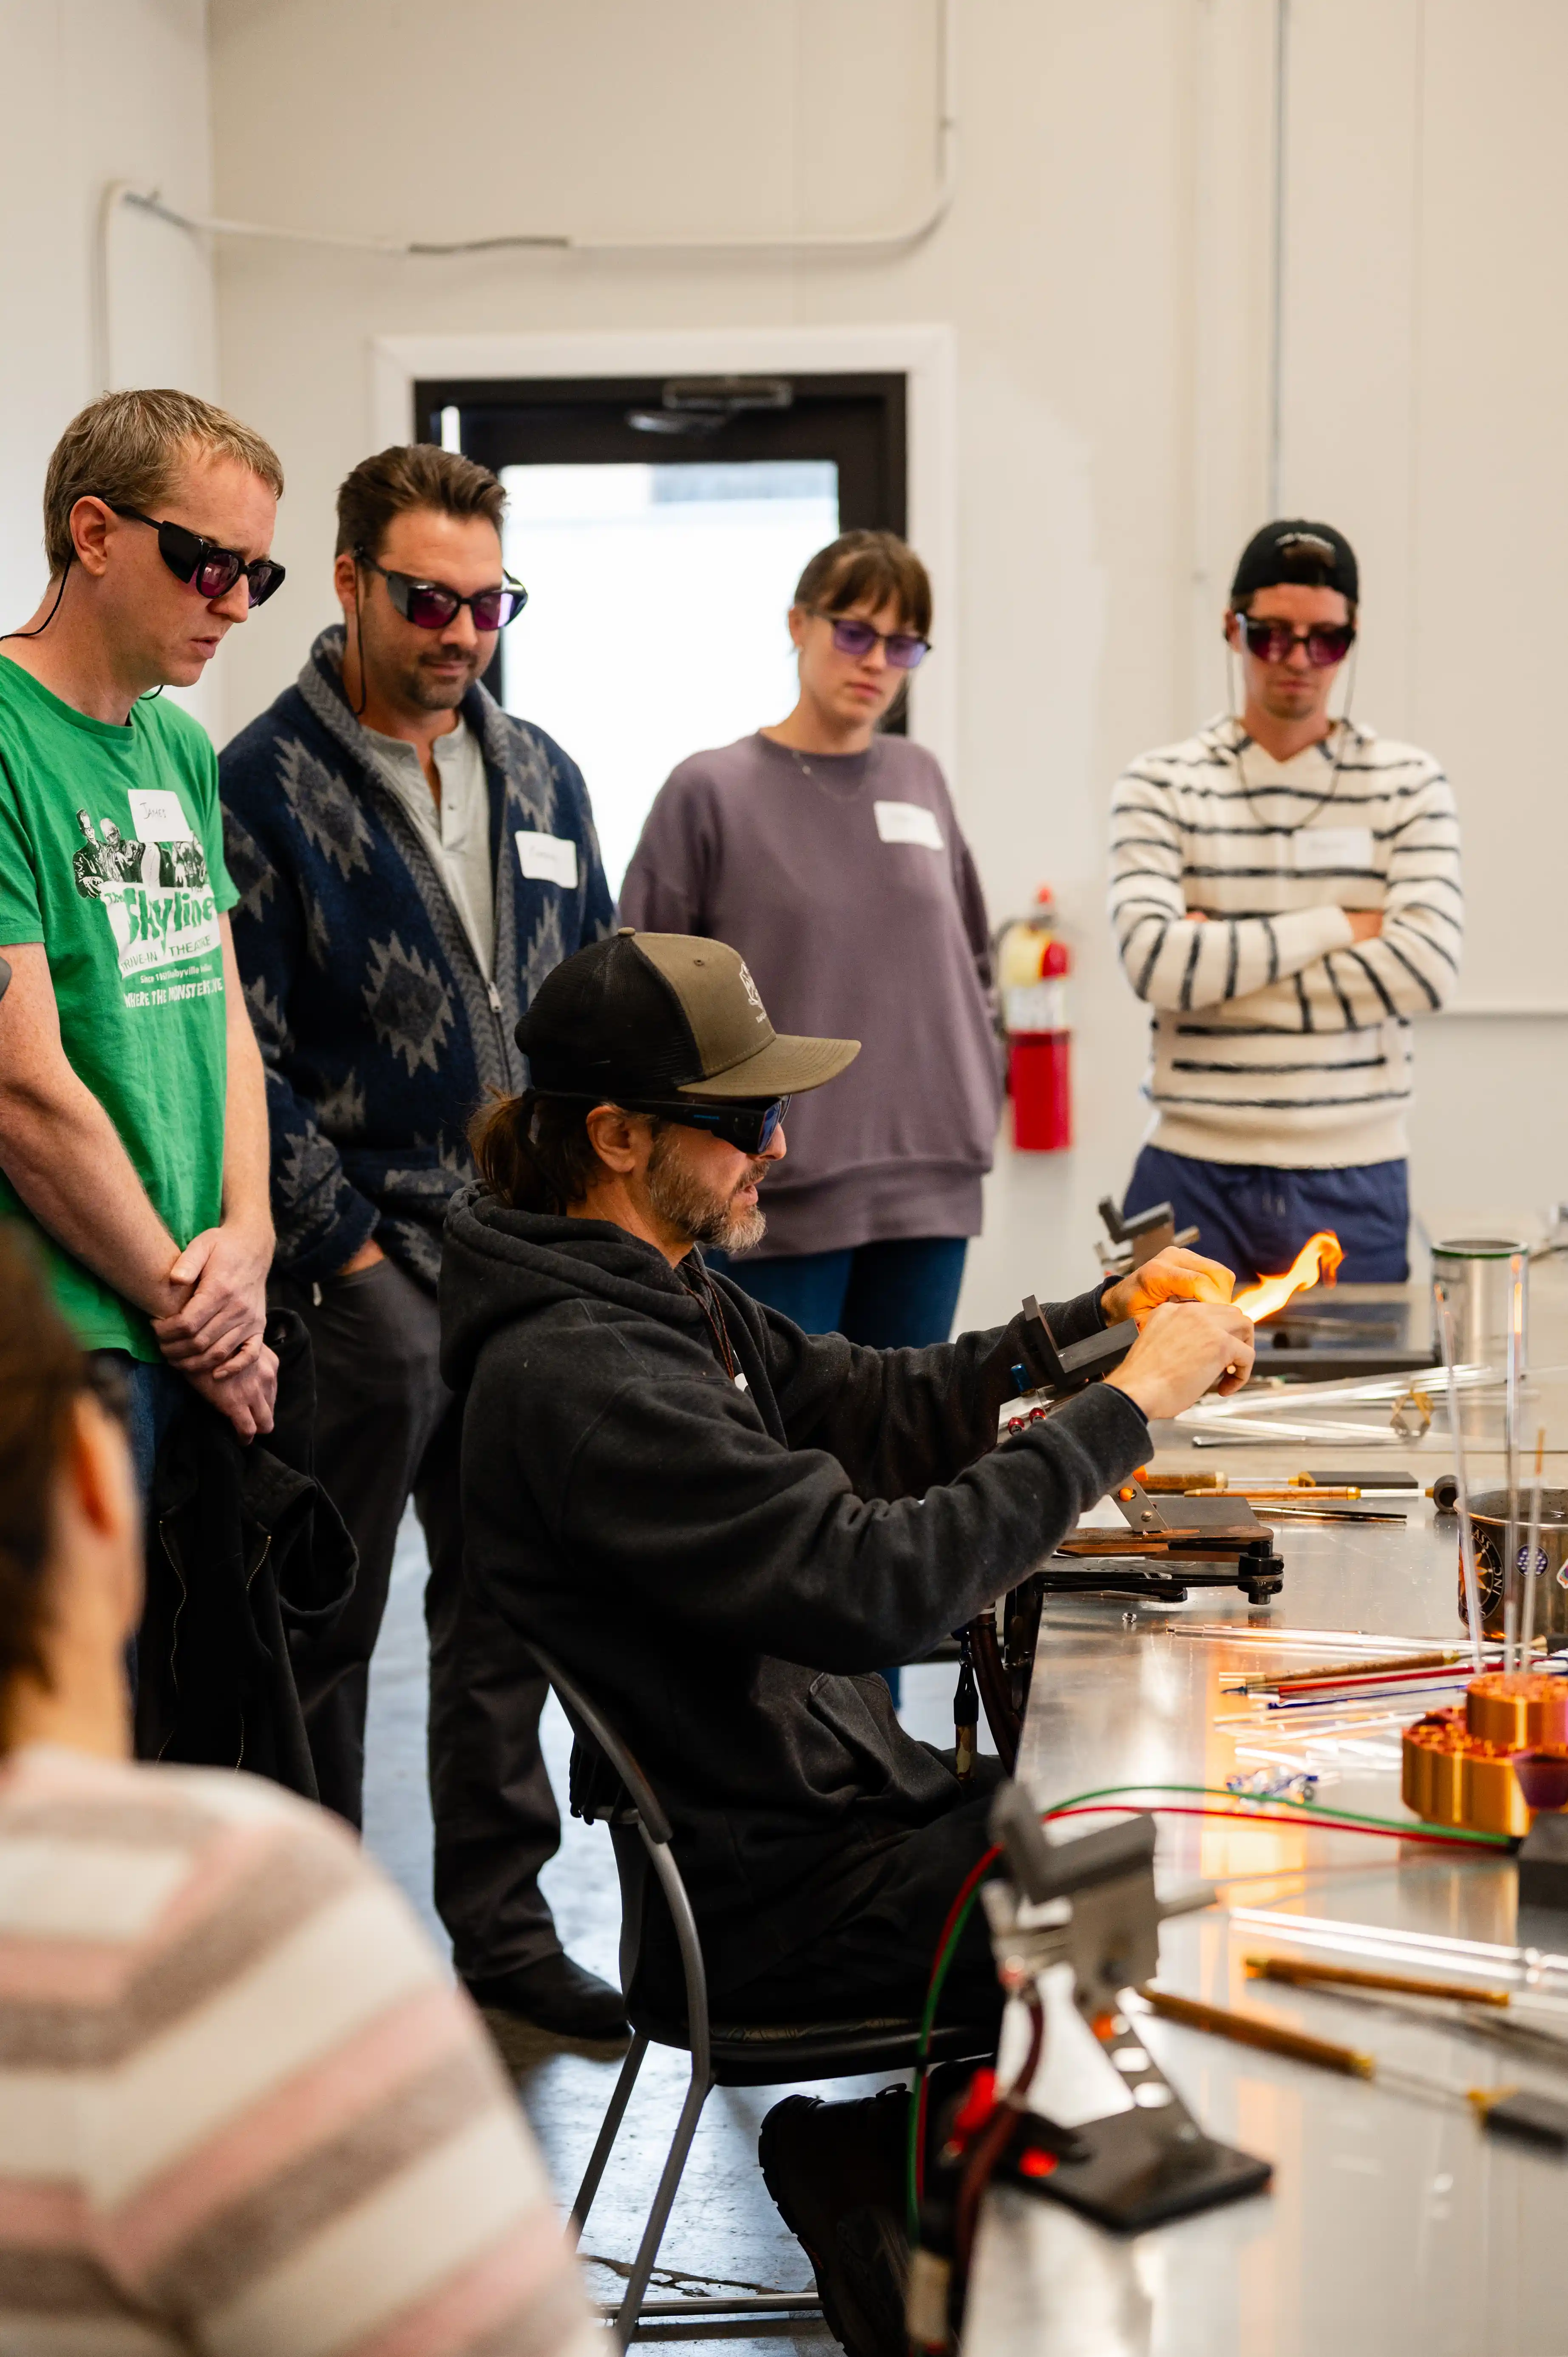 Glassblowing workshop with an instructor demonstrating techniques to a group of attentive students wearing protective eyewear.